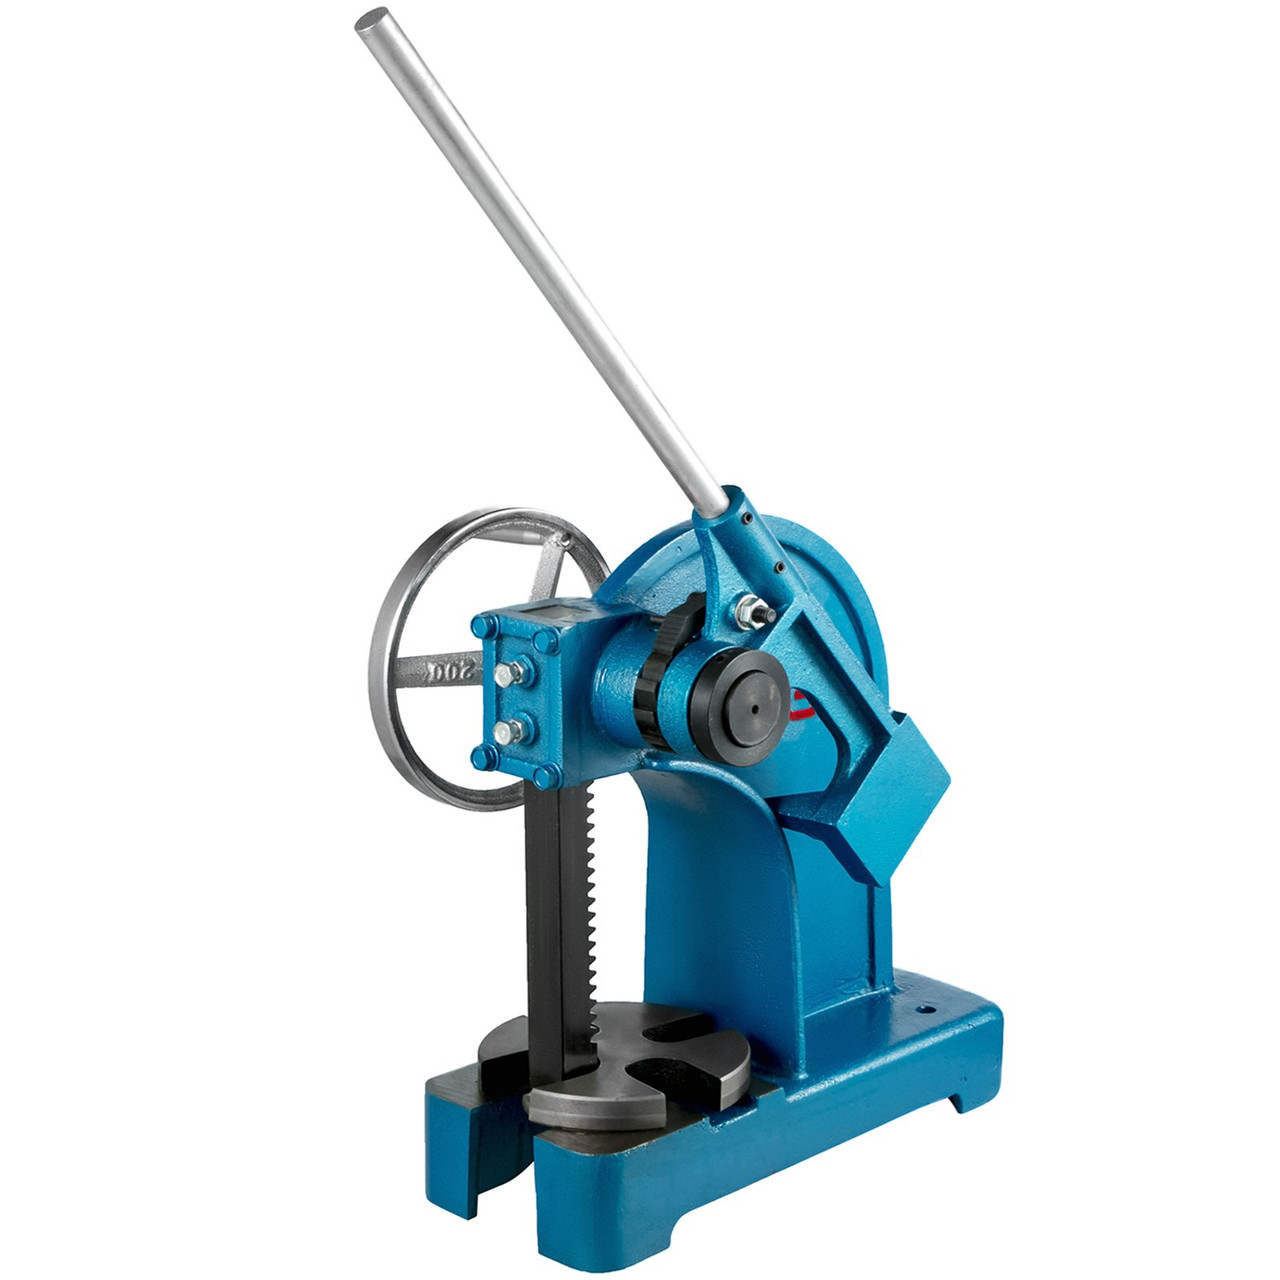 Heavy Duty Arbor Press 3 Ton, Ratchet Leverage Arbor Press with Handwheel, Manual Desktop Metal Arbor Press 21.5 Inch Max. Working Height, for Riveting Punching Holes